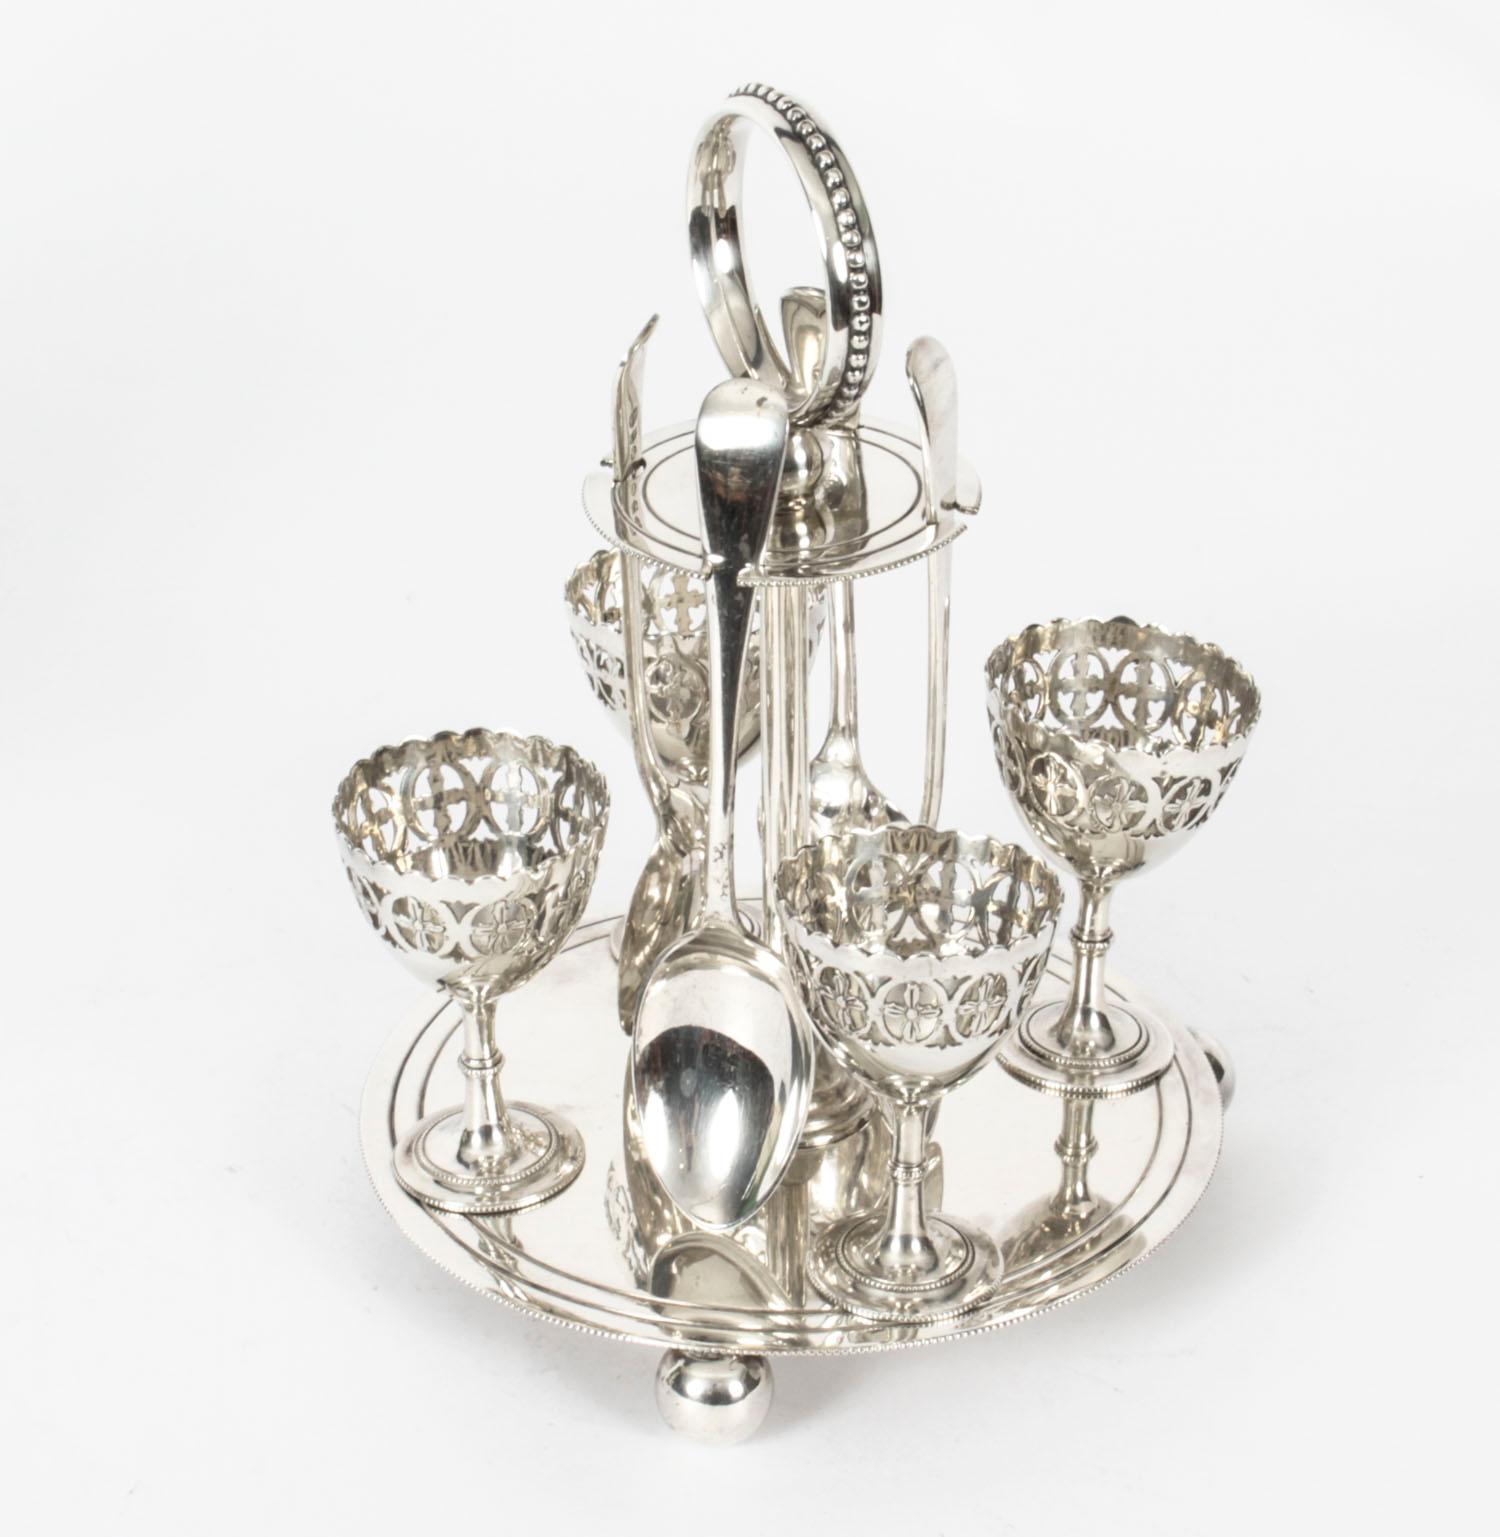 Antique Silver Plated Egg Cruet with Spoons, 19th Century 10